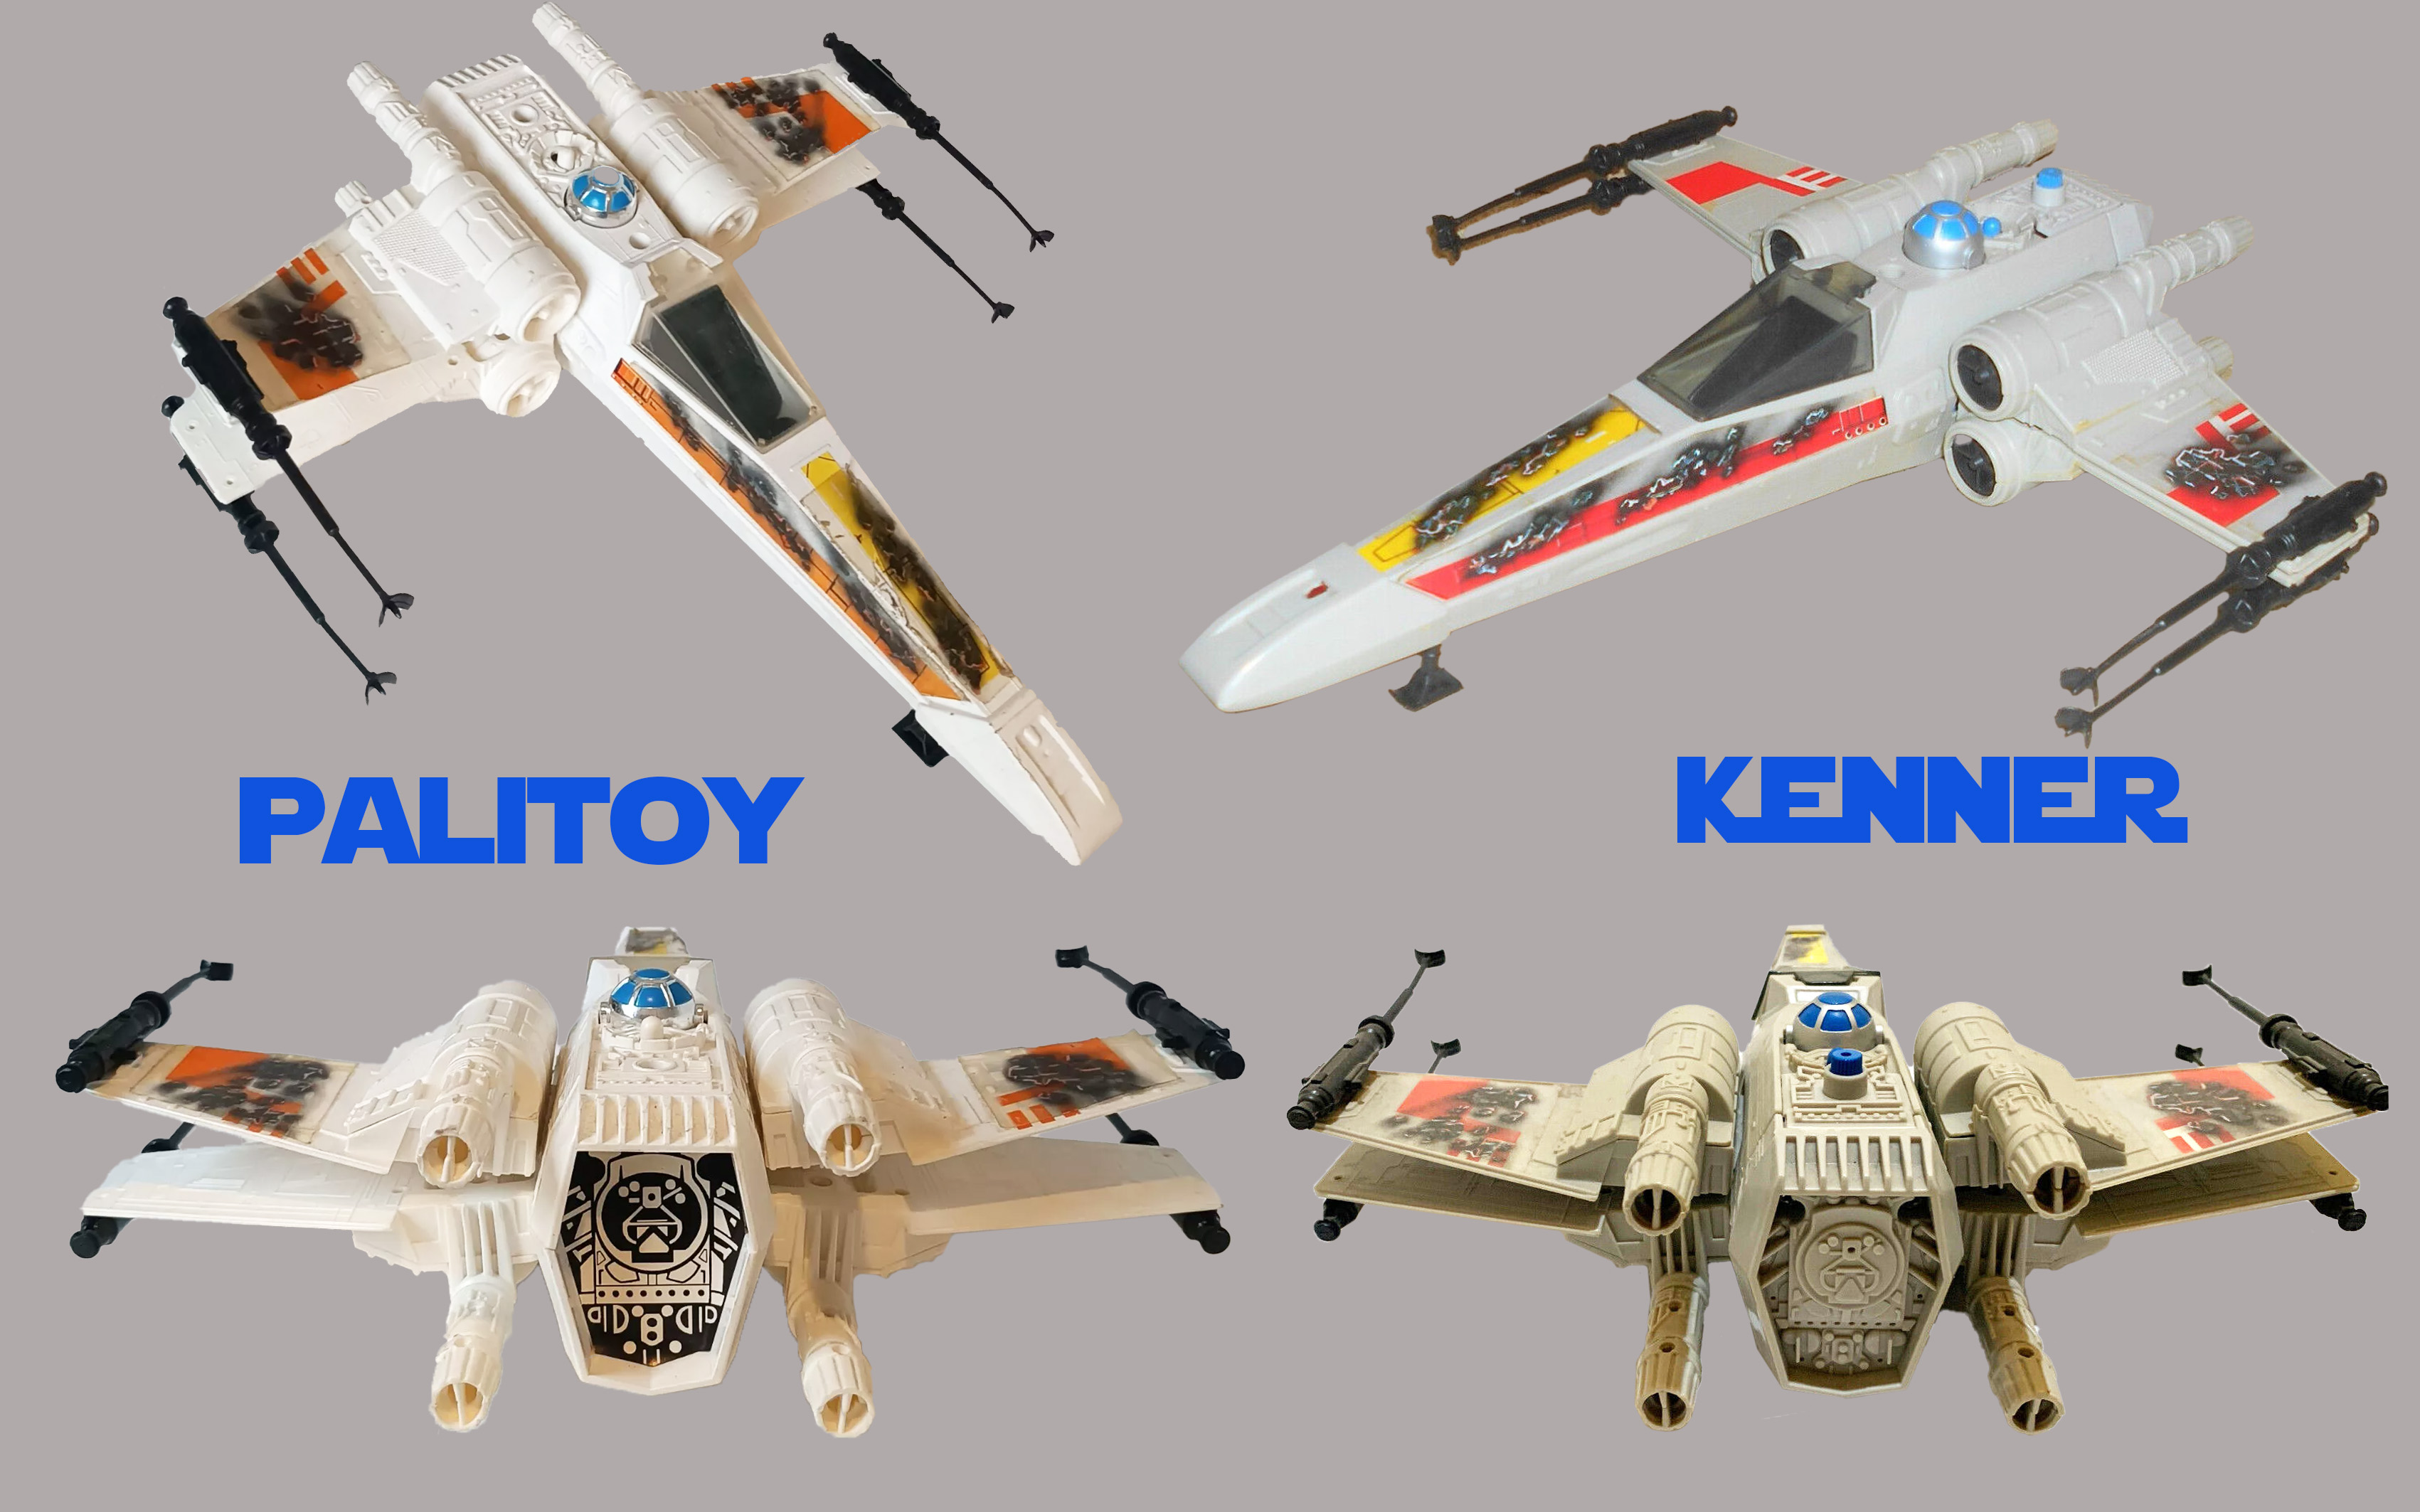 The Palitoy Battle Damaged X-Wing differs from the US released Battle Damaged X-Wings in a few ways, including a white body, a white button, and a rear sticker detail.